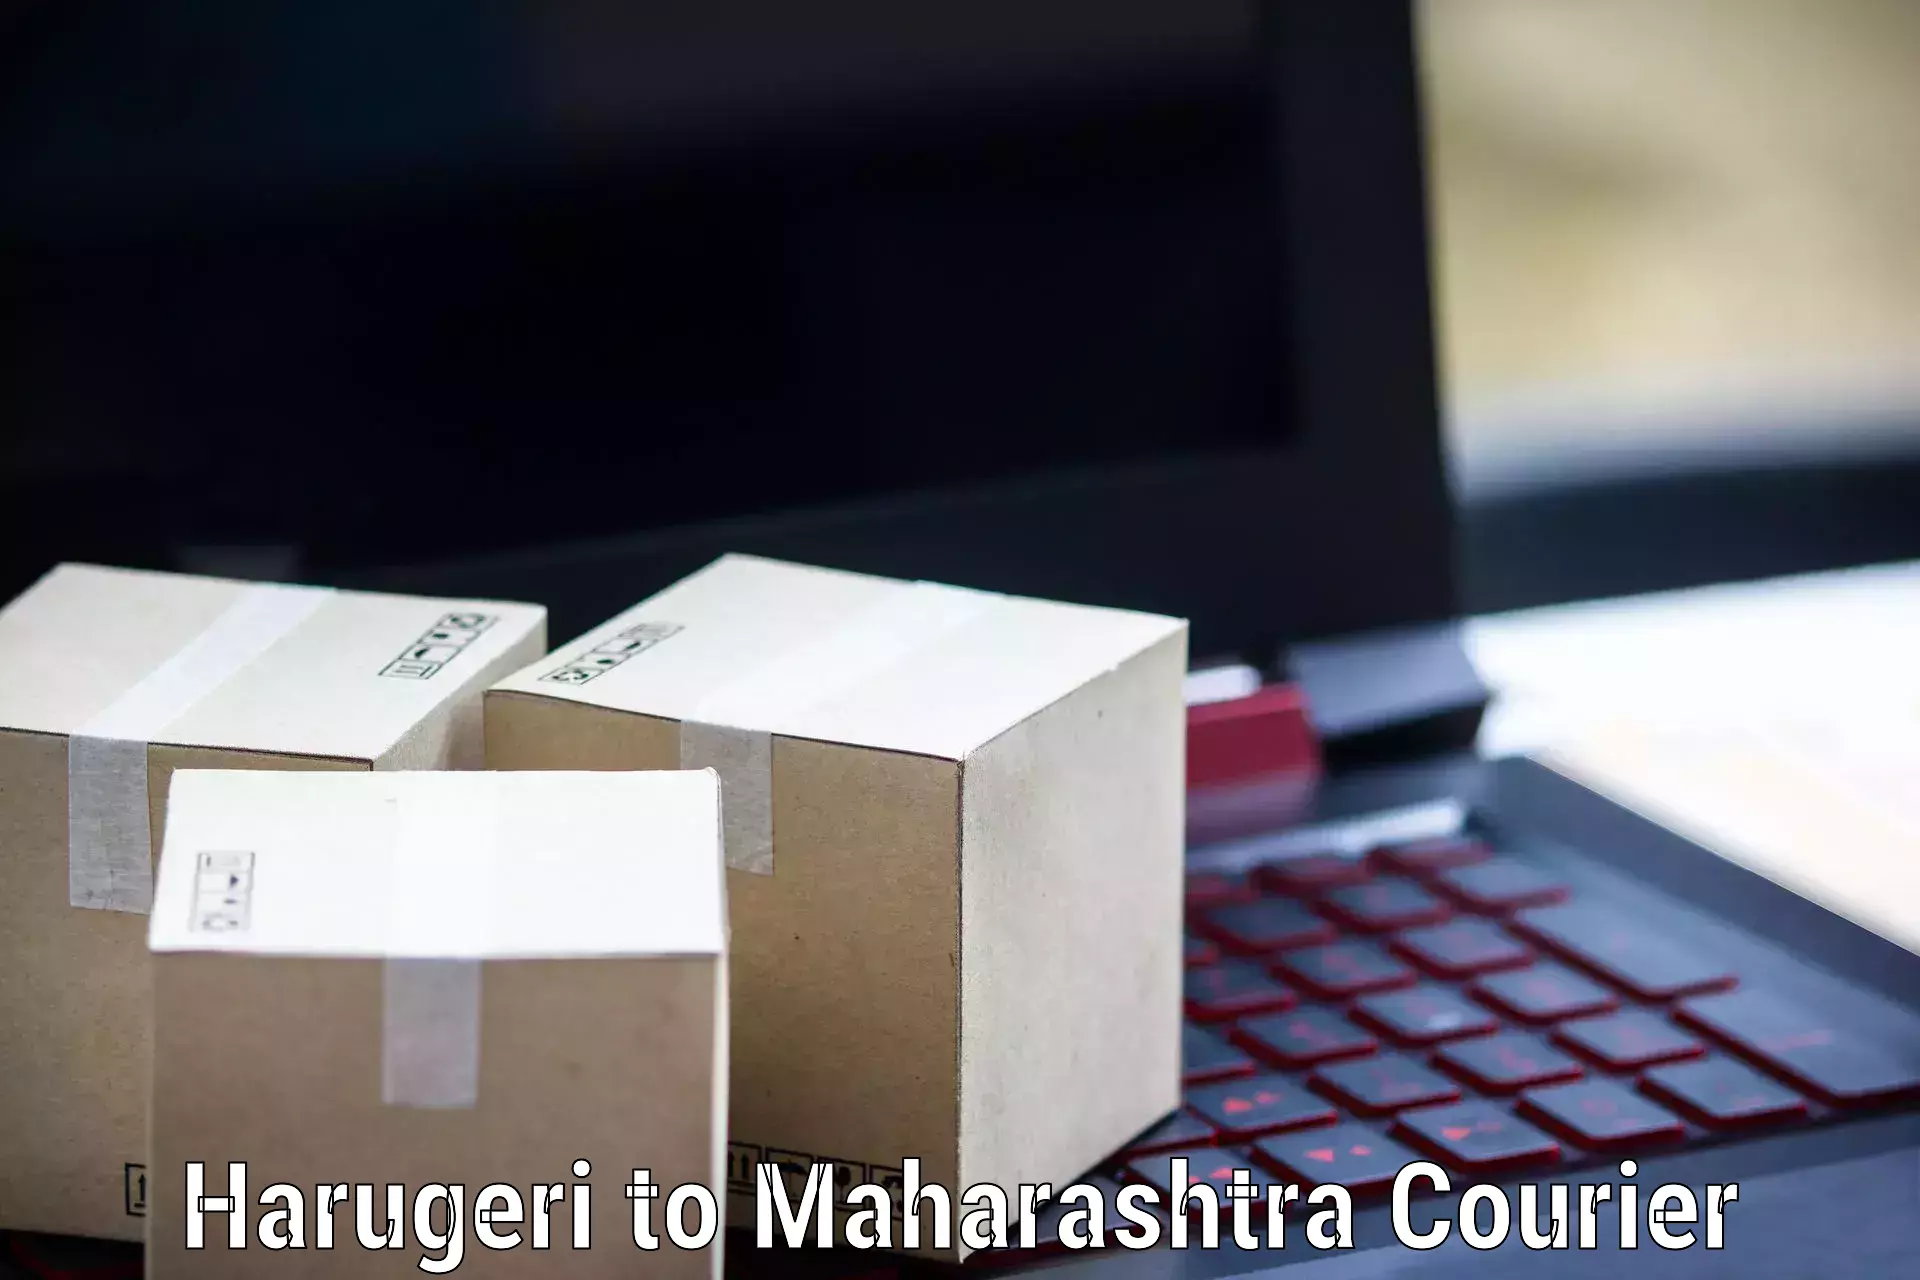 Courier service efficiency Harugeri to Mahabaleshwar